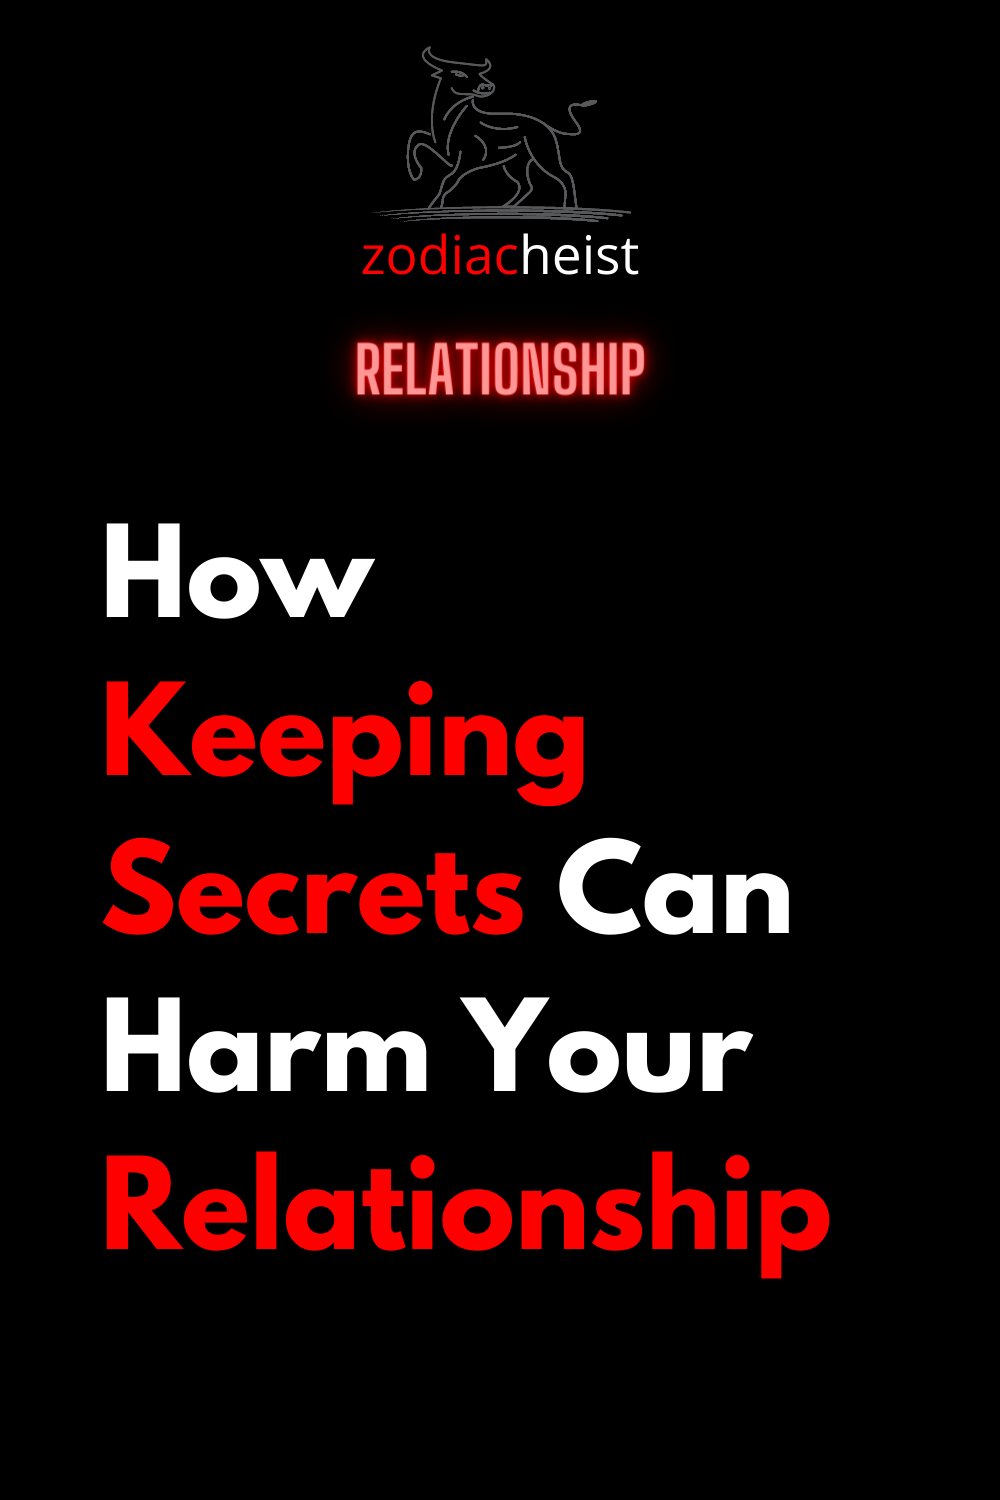 How Keeping Secrets Can Harm Your Relationship